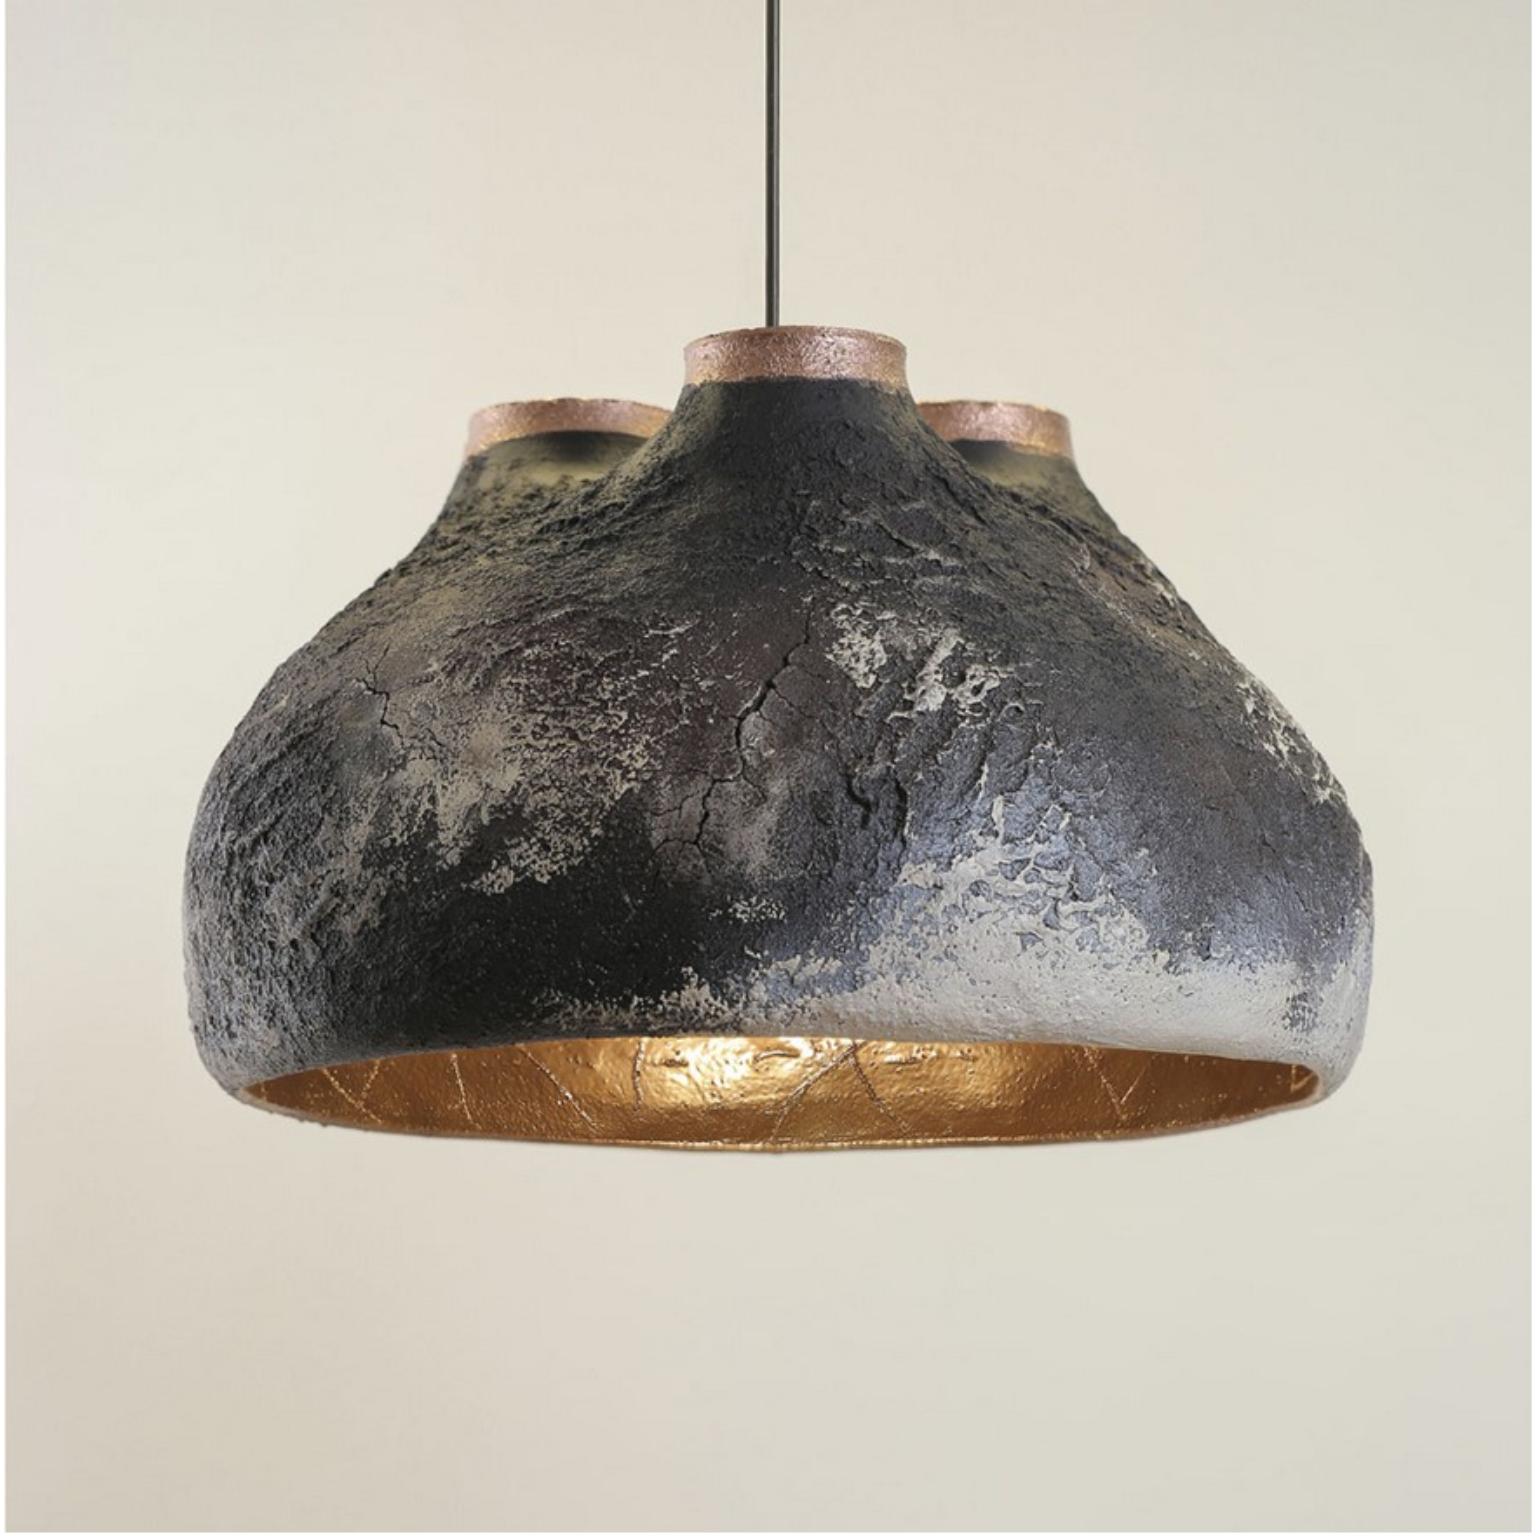 Crust flattened pendant lamp by Makhno.
Dimensions: D 33.5 x H 59.5 cm.
Materials: ceramics.

Makhno studio is a workshop of modern Ukrainian design and architecture. We work in Ukrainian contemporary style. According to international experts,